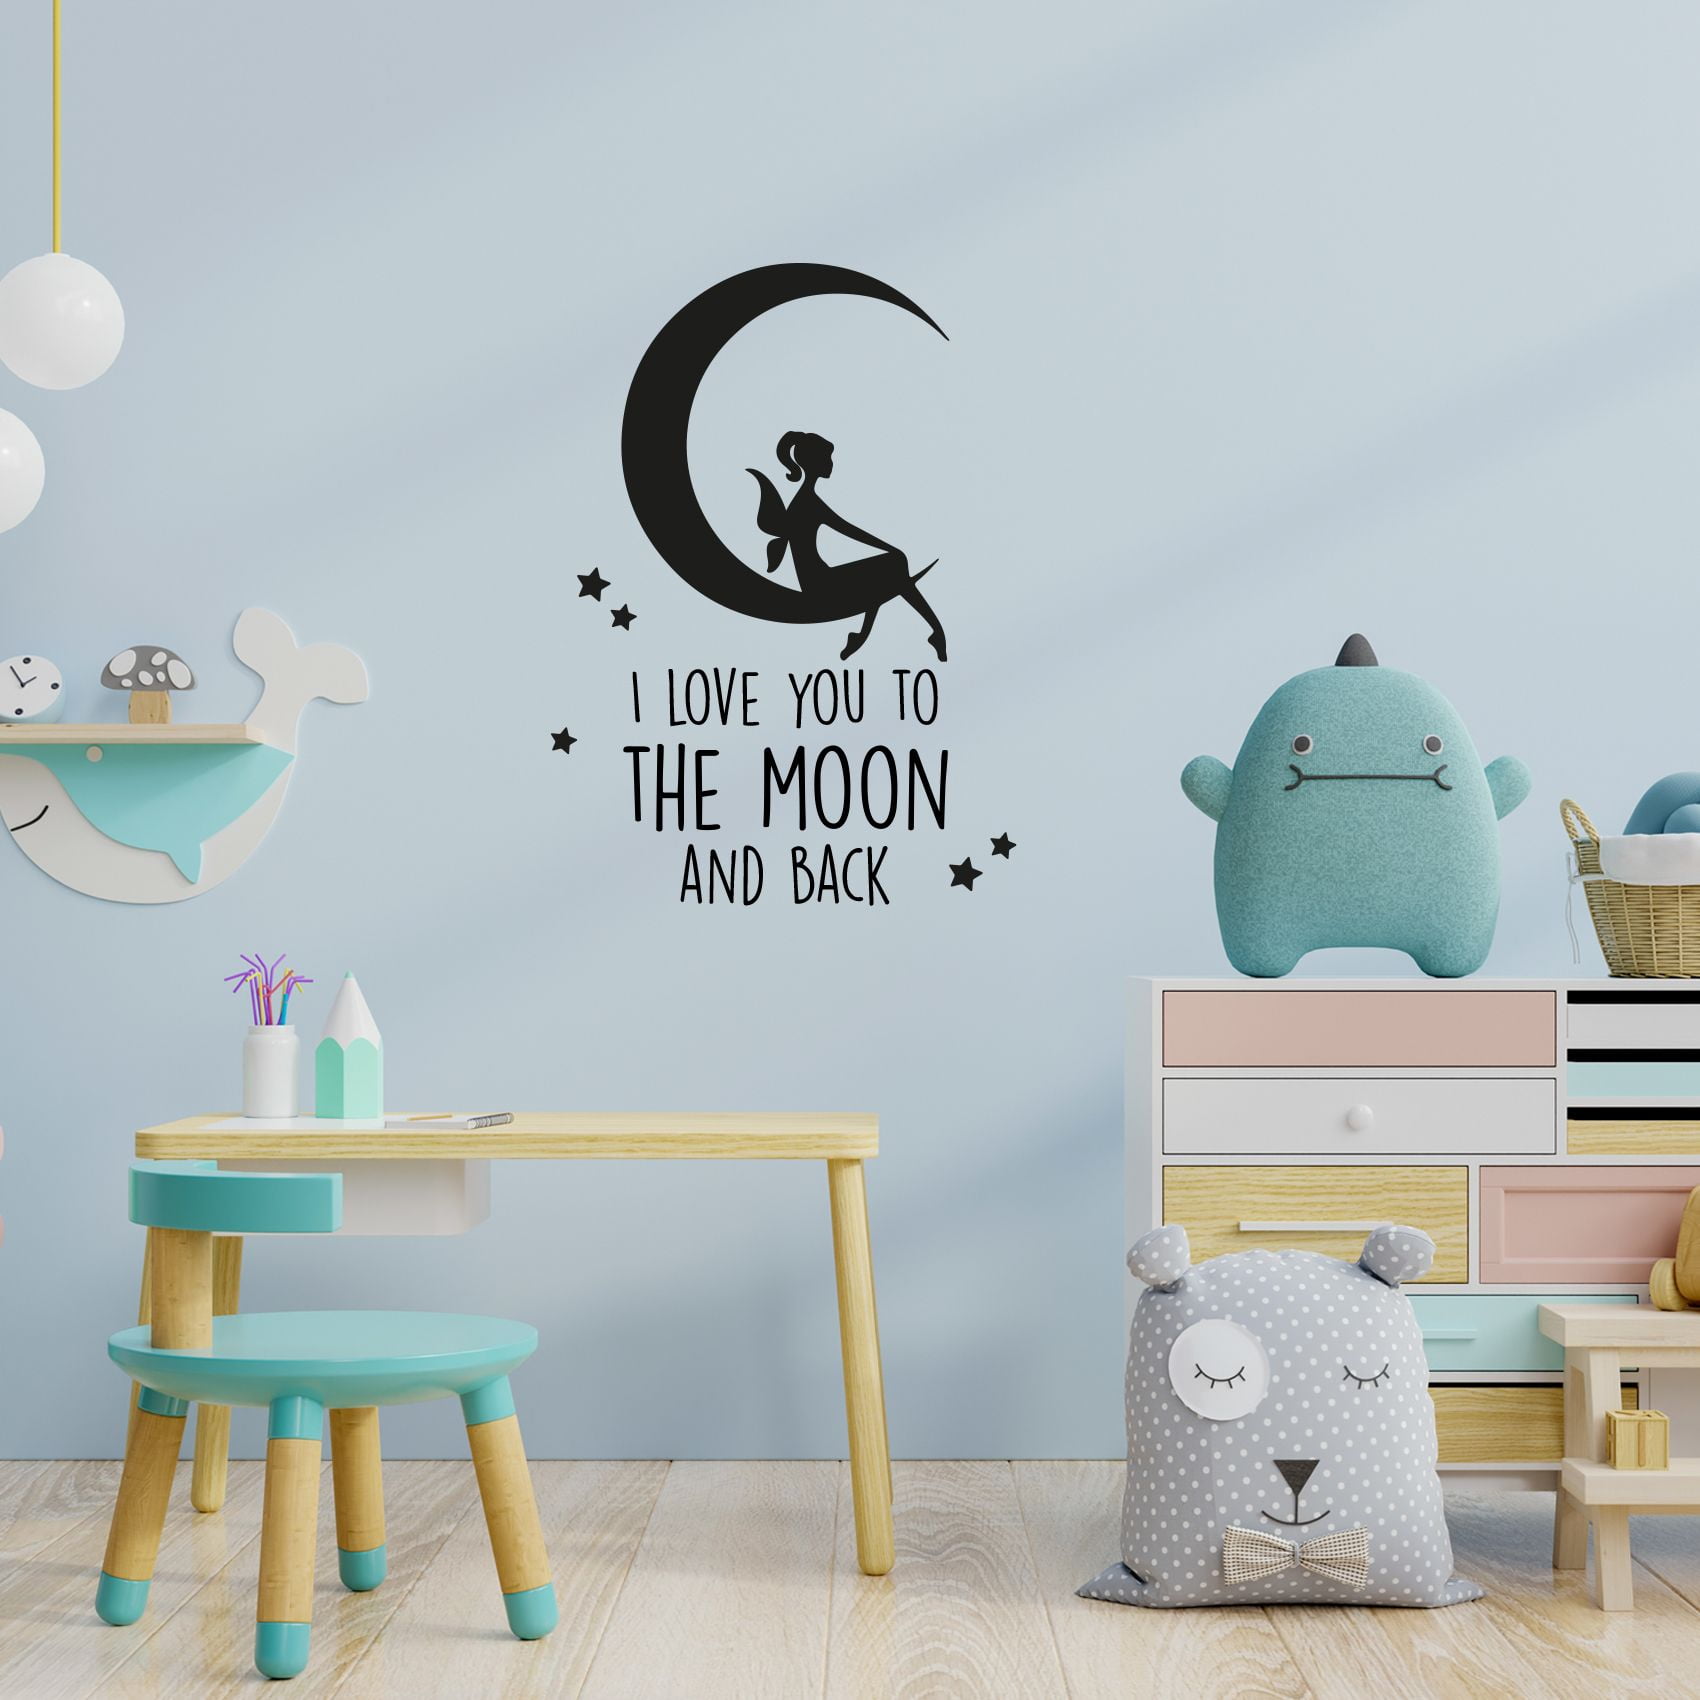 Love You to The Moon and Back Bedroom Living Room Decal Wall Art Sticker Picture